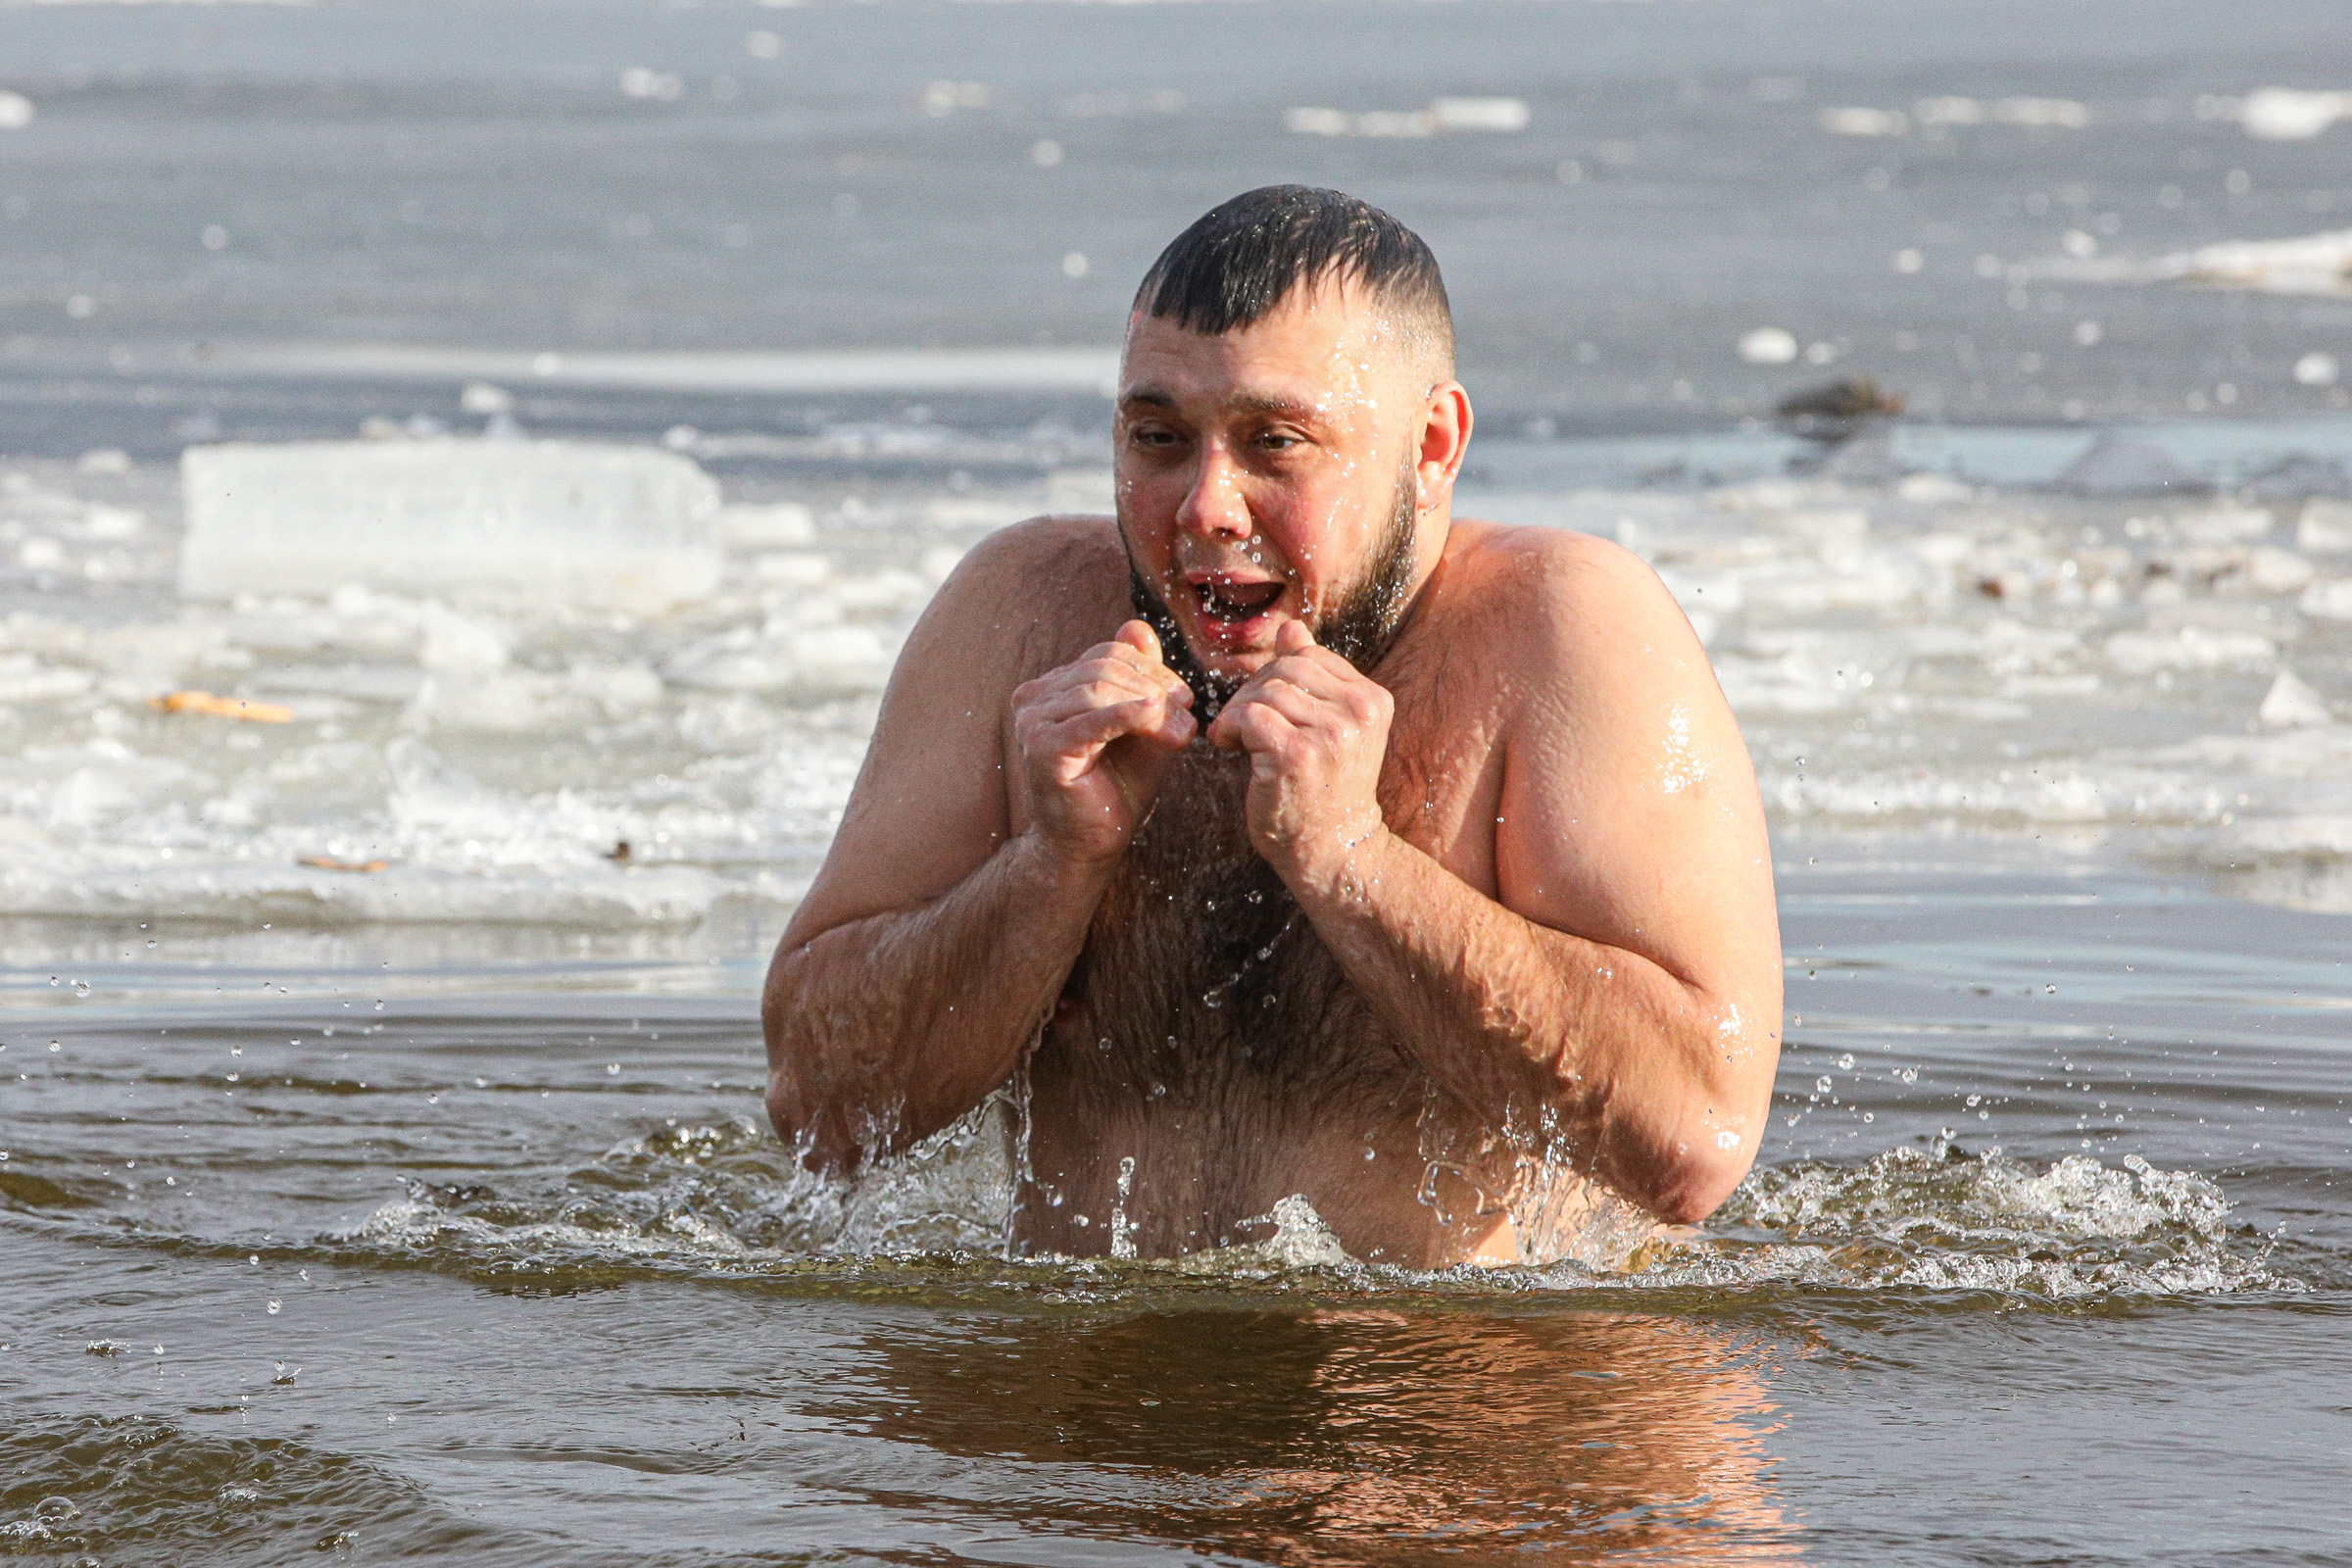 People plunge into icy water in Kyiv to mark Epiphany (PHOTOS)